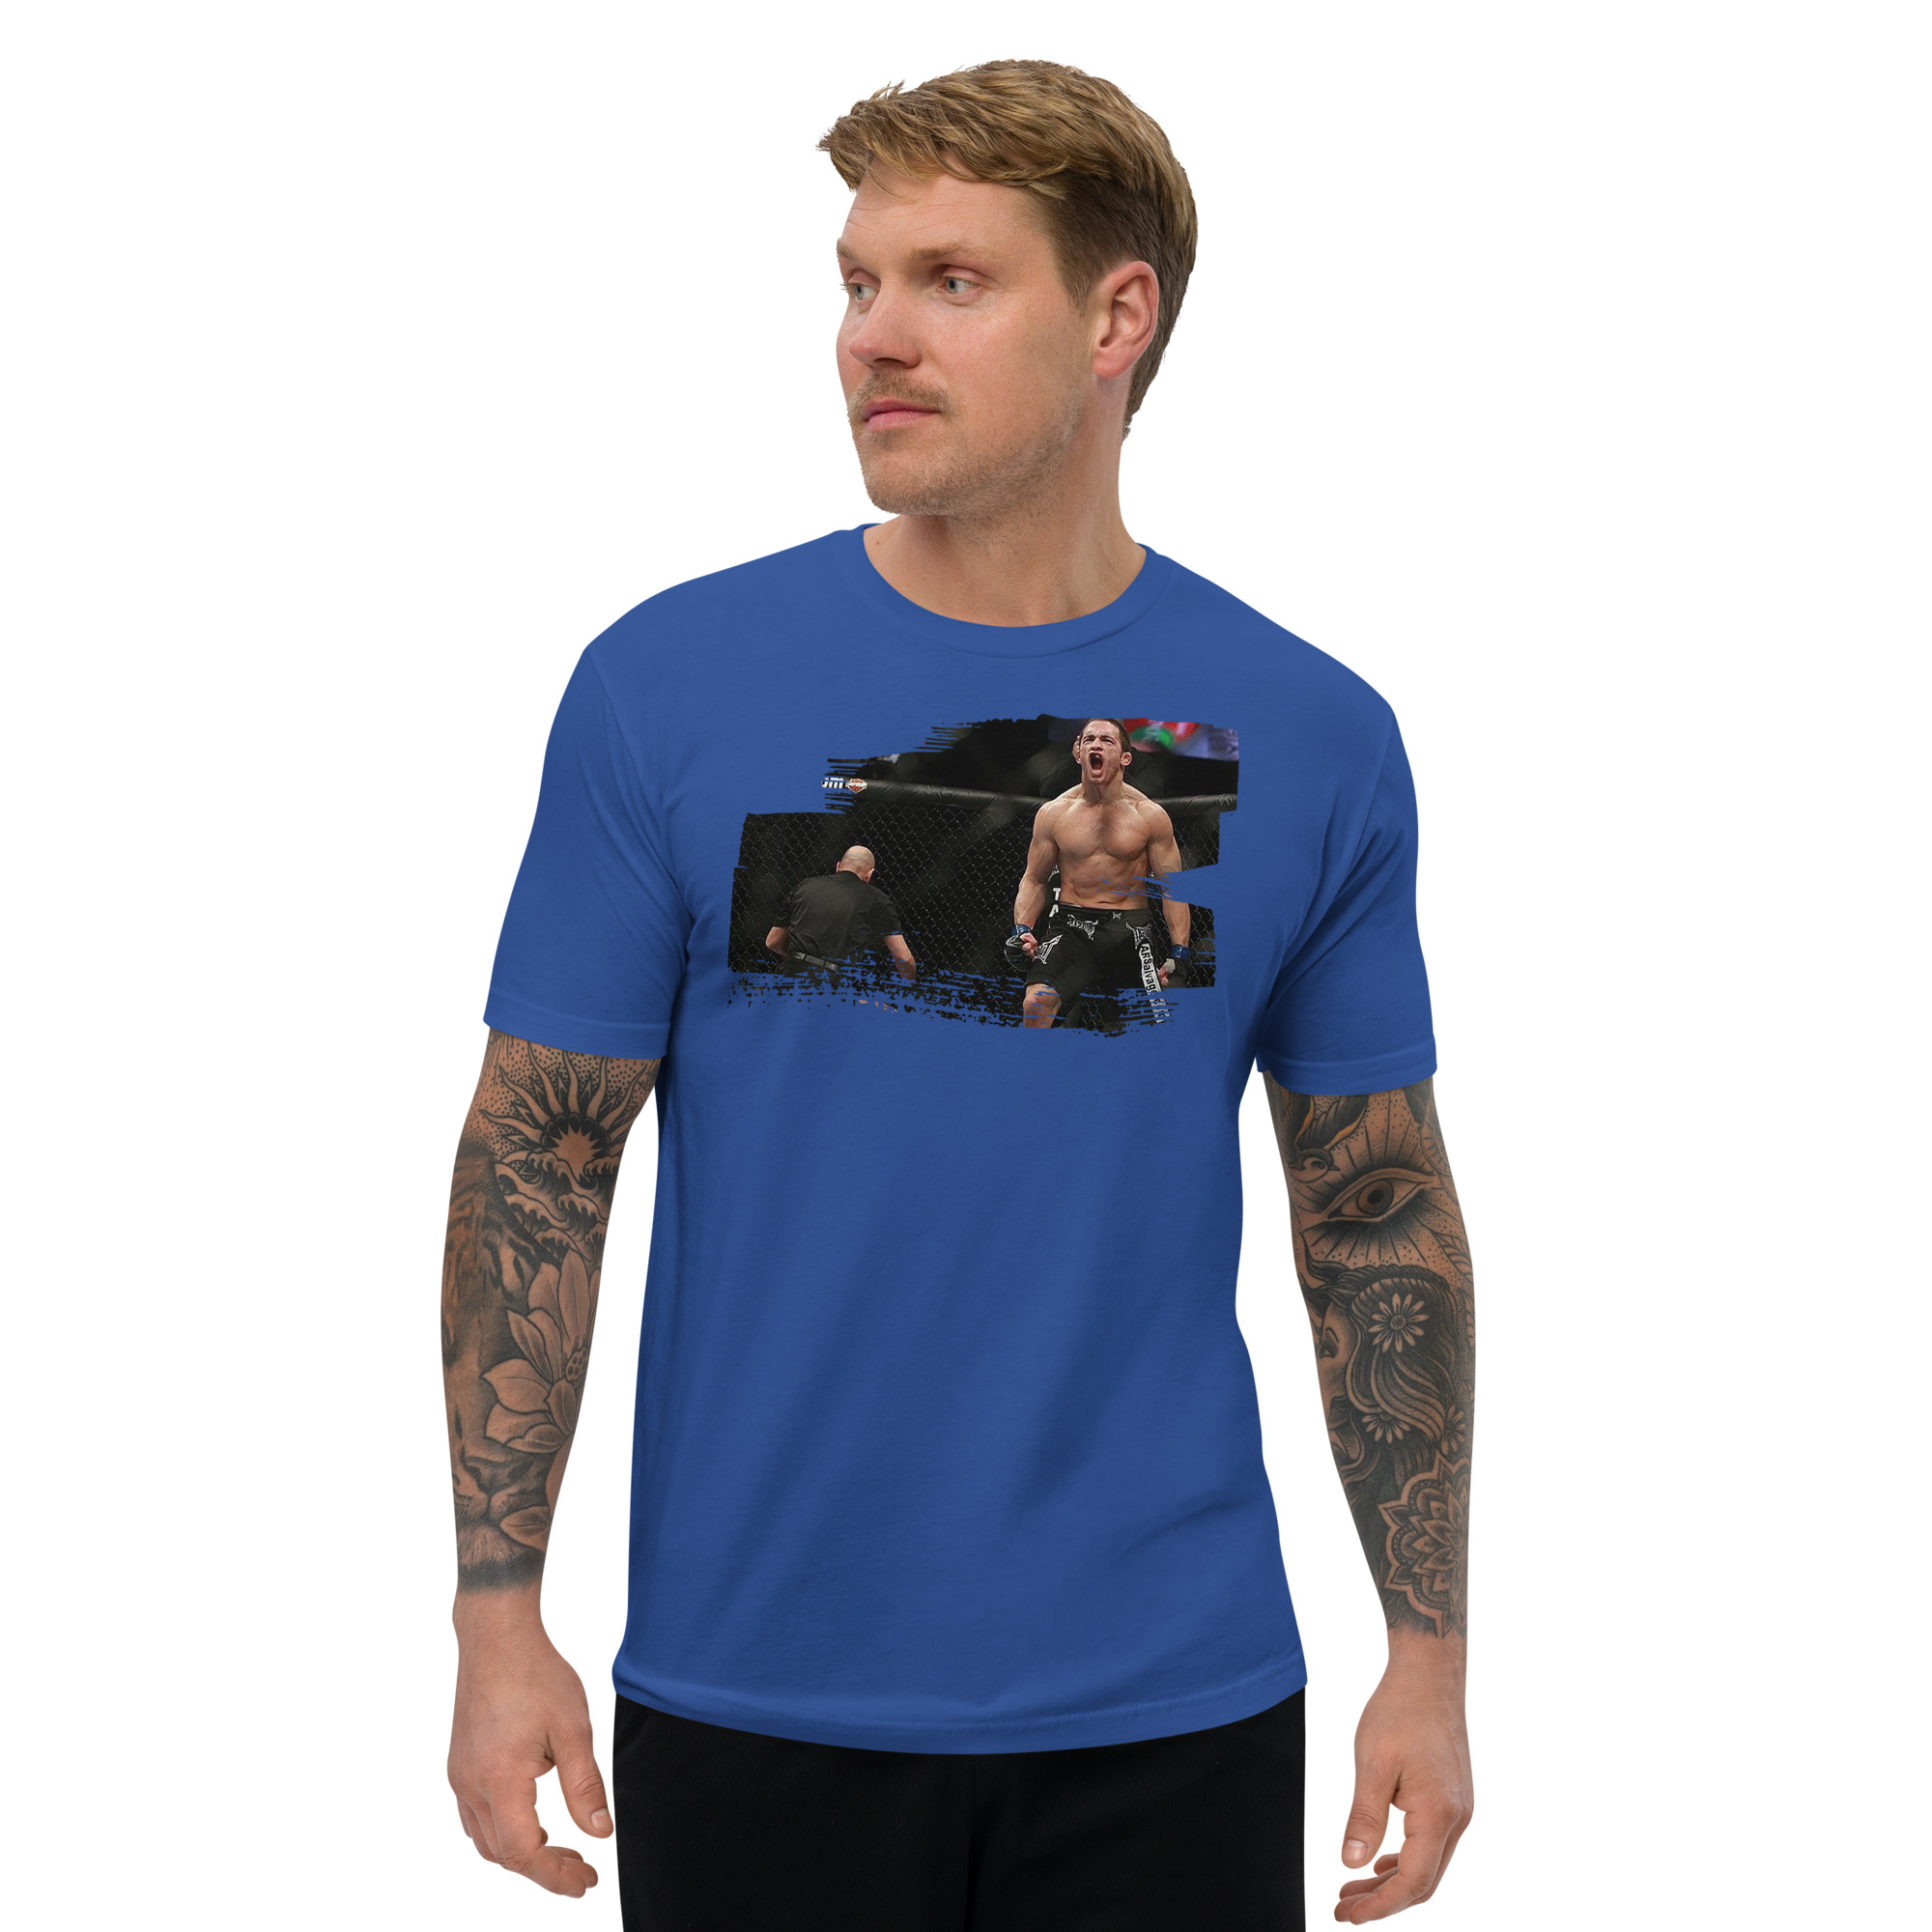 mens-fitted-t-shirt-royal-blue-front-63ddc8a2788ae.jpg